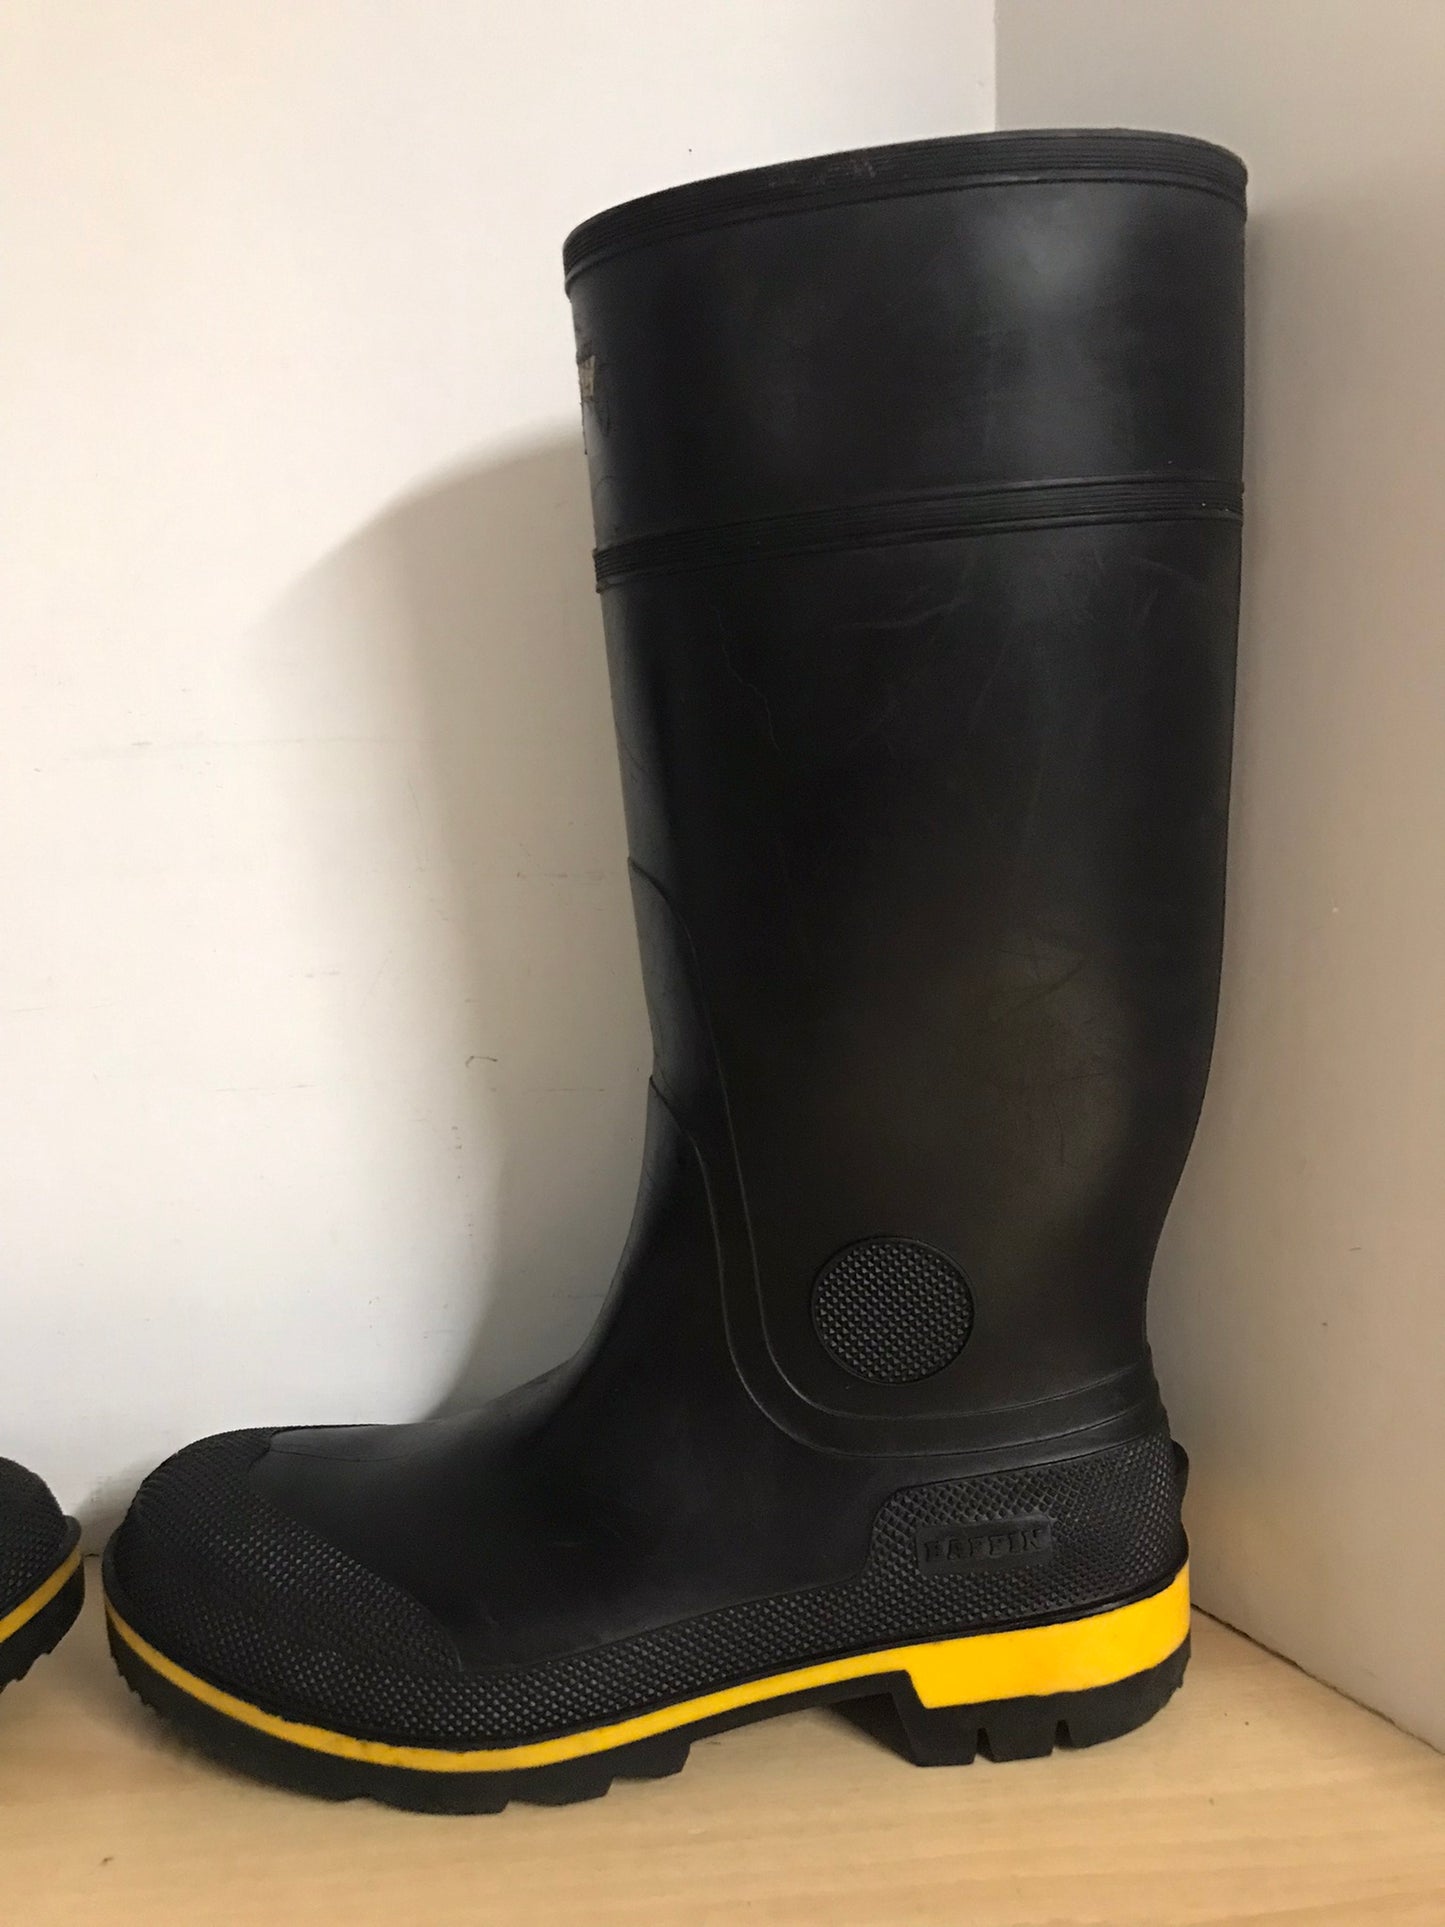 Rain Boots Men's Size 12 SA Approved Work Boots Lacrosse SA Steel Toe Rubber Excellent